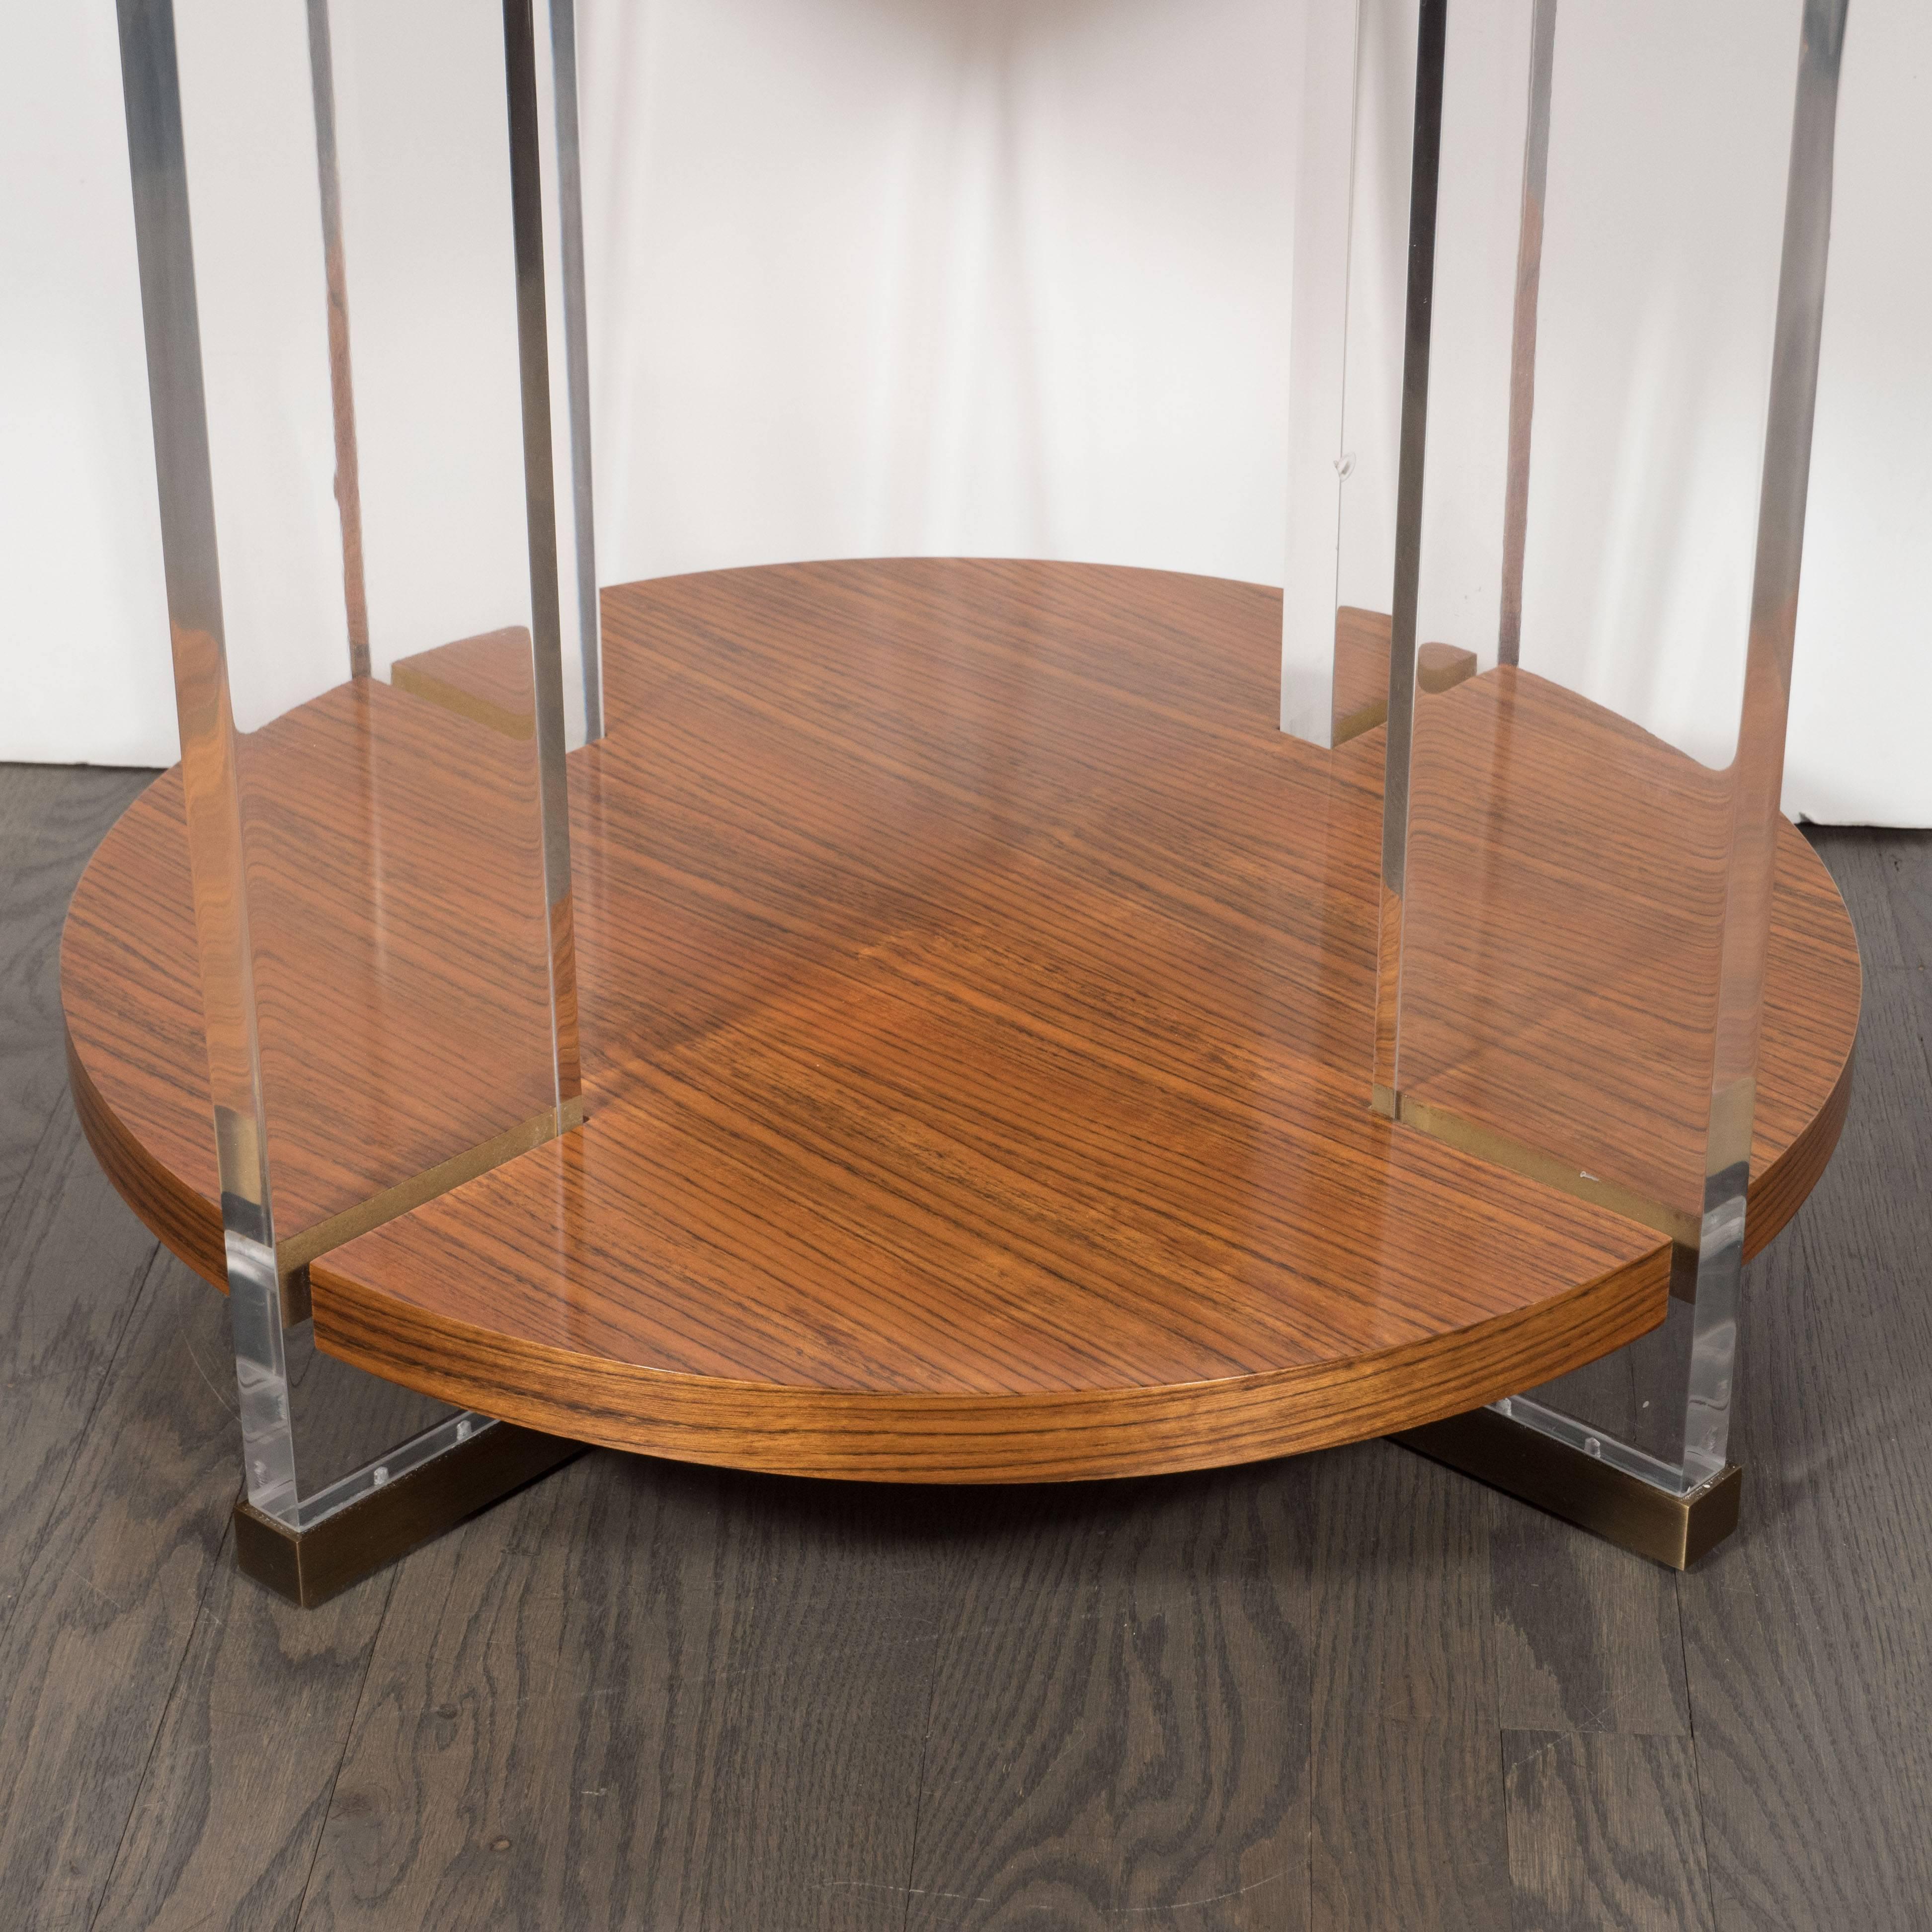 20th Century Vanguard Circular Table in Bookmatched Mozambique with Lucite Supports